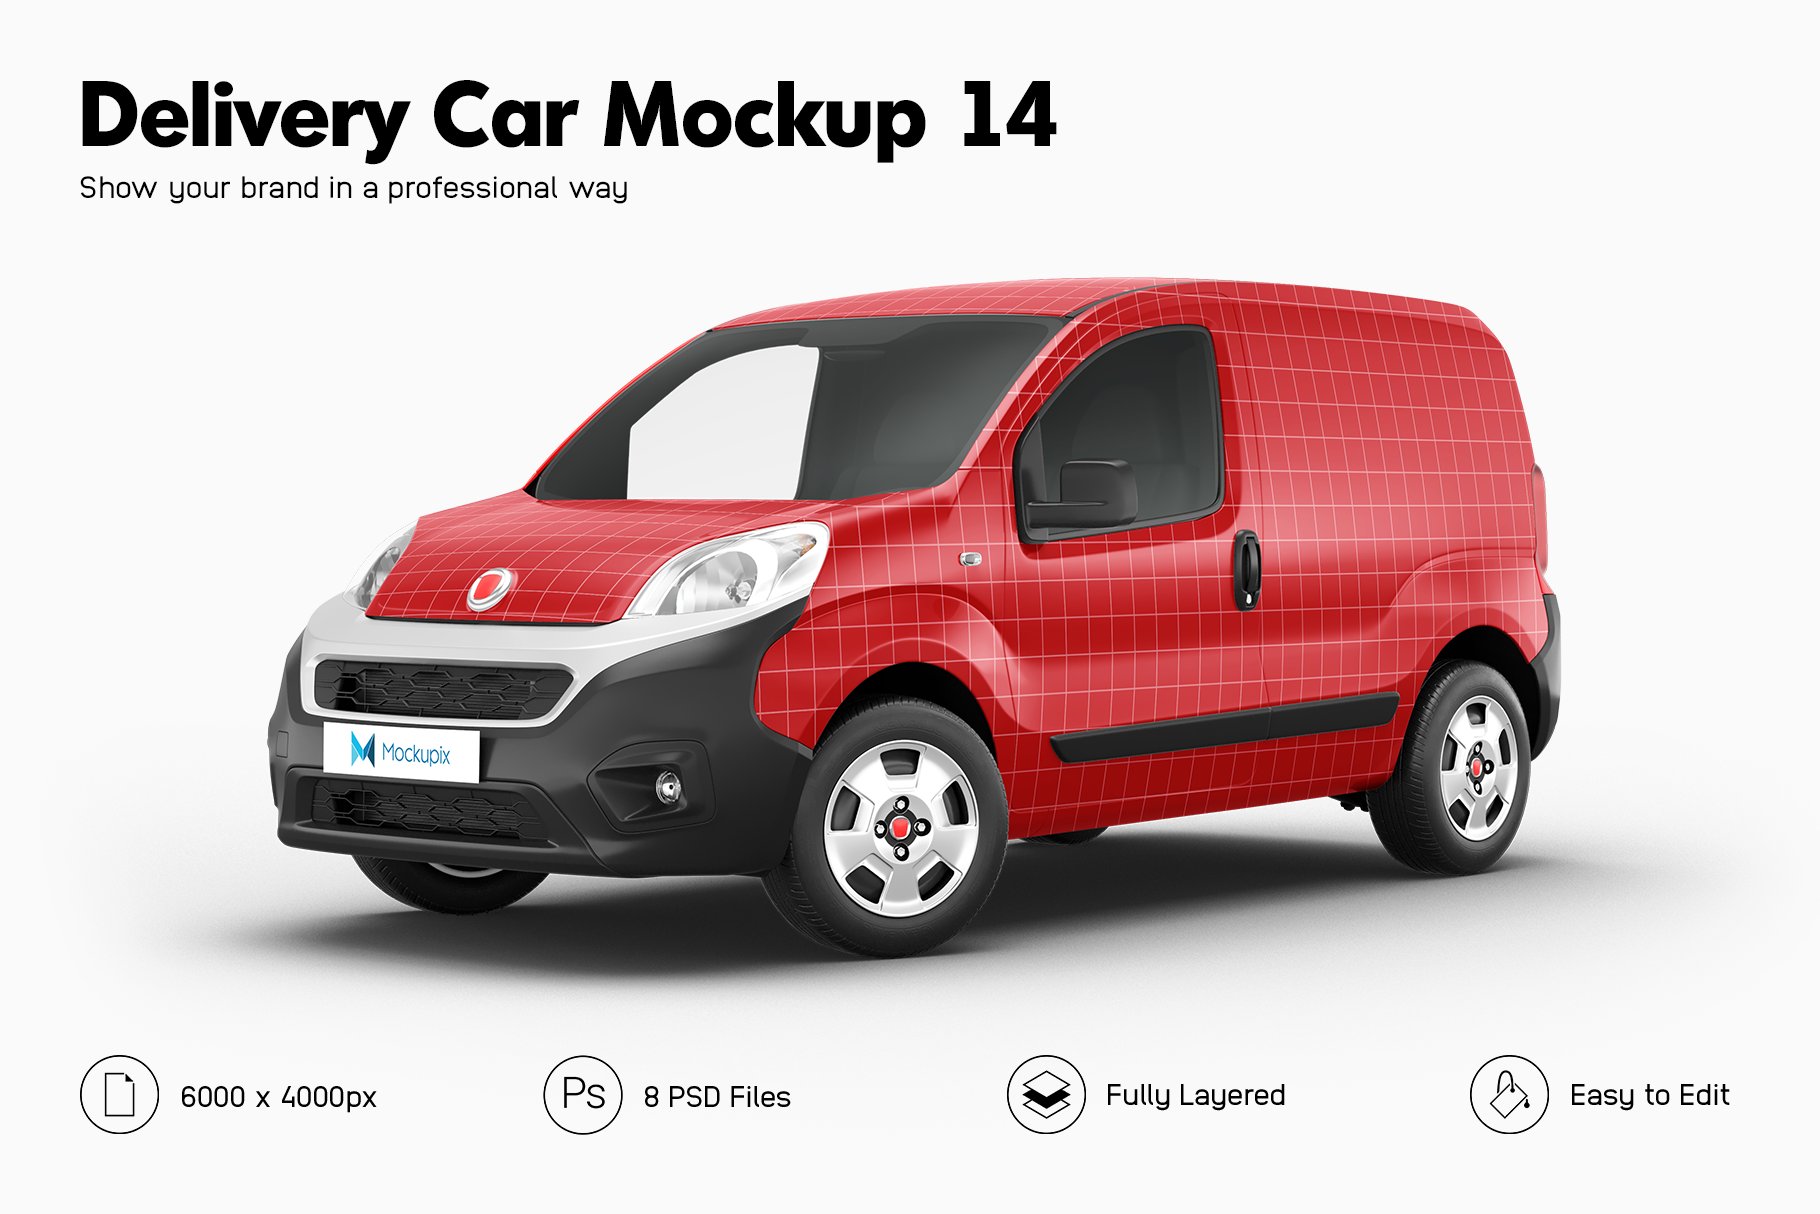 Delivery Car Mockup 14 cover image.